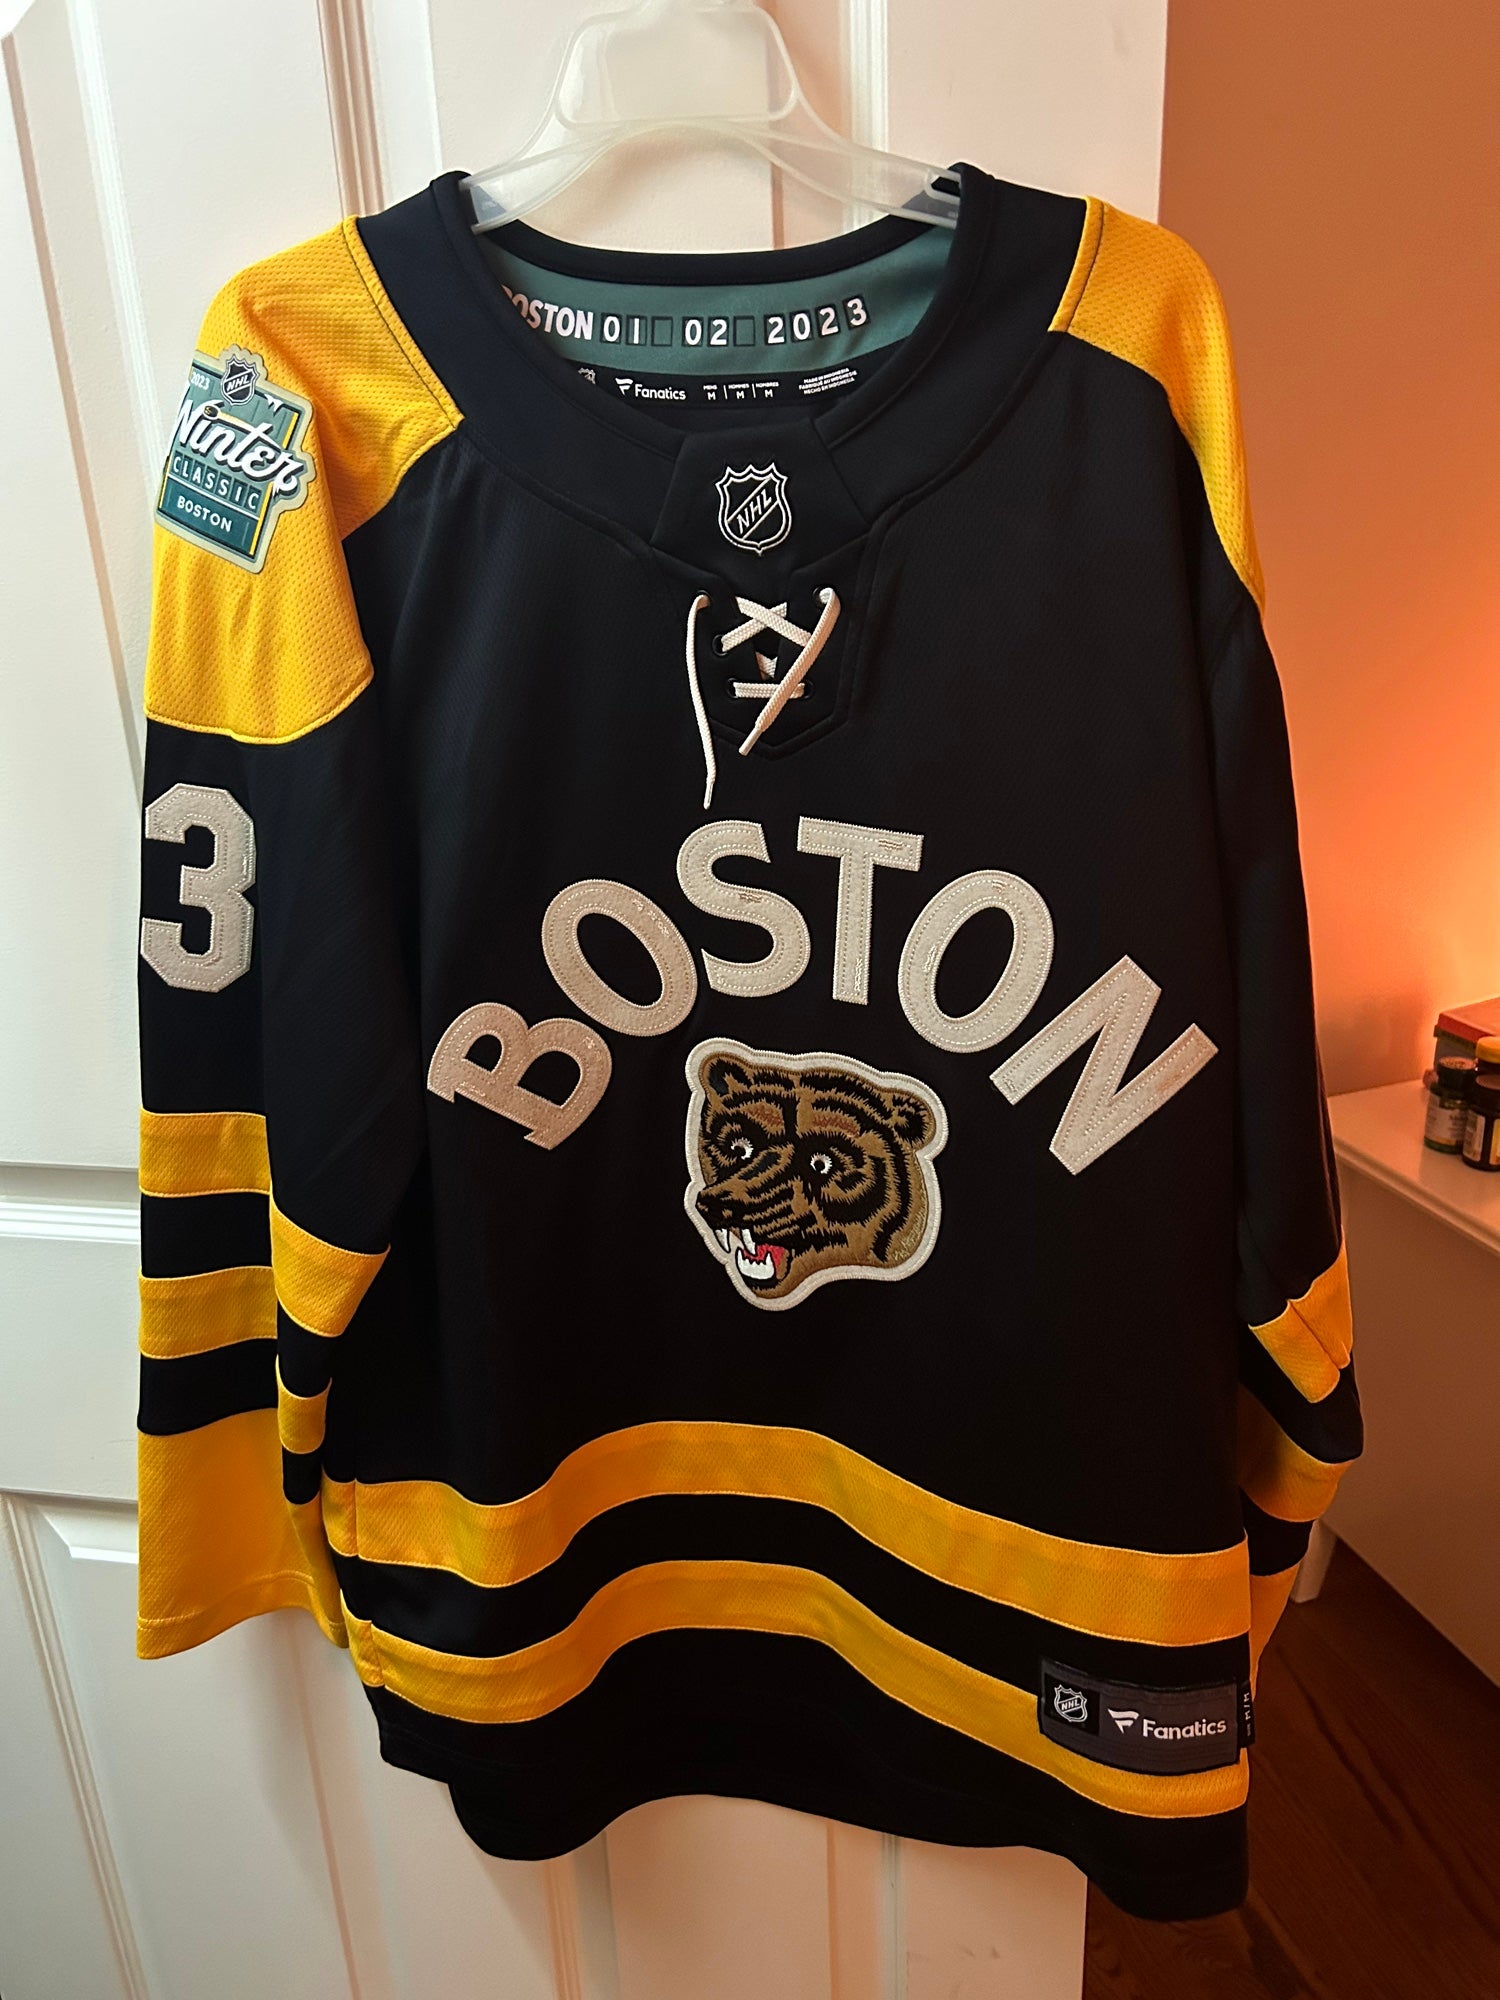 Boston Bruins 2023 Winter Classic jerseys available now; Where to